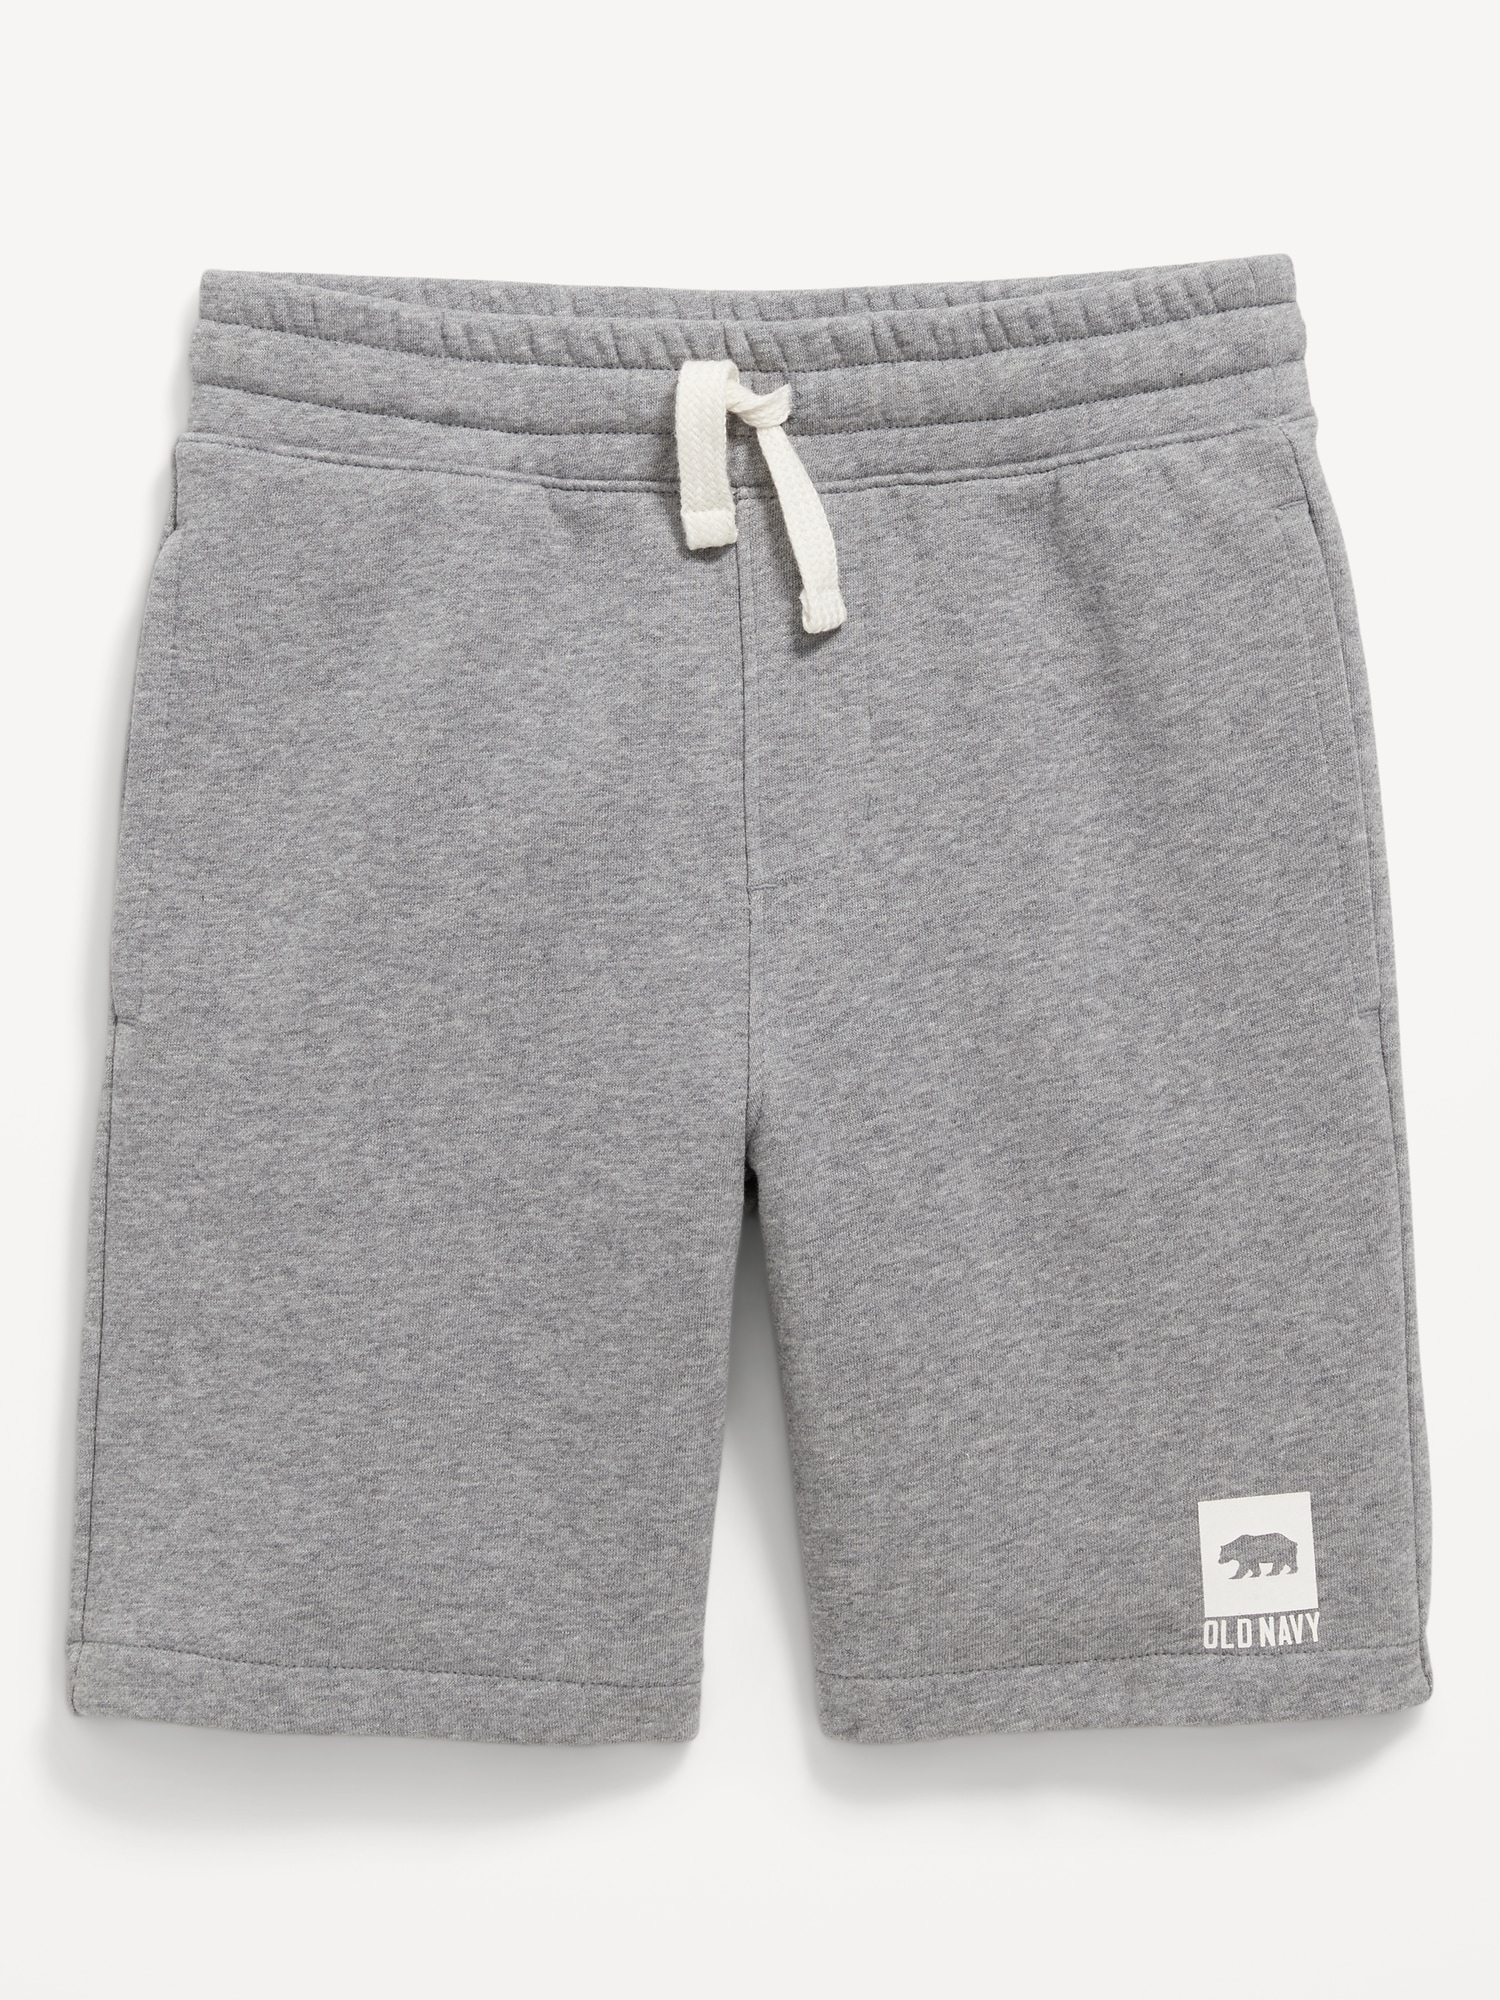 Old Navy Dynamic Fleece 9” Shorts Light Heather Gray Mens Size Small N -  beyond exchange